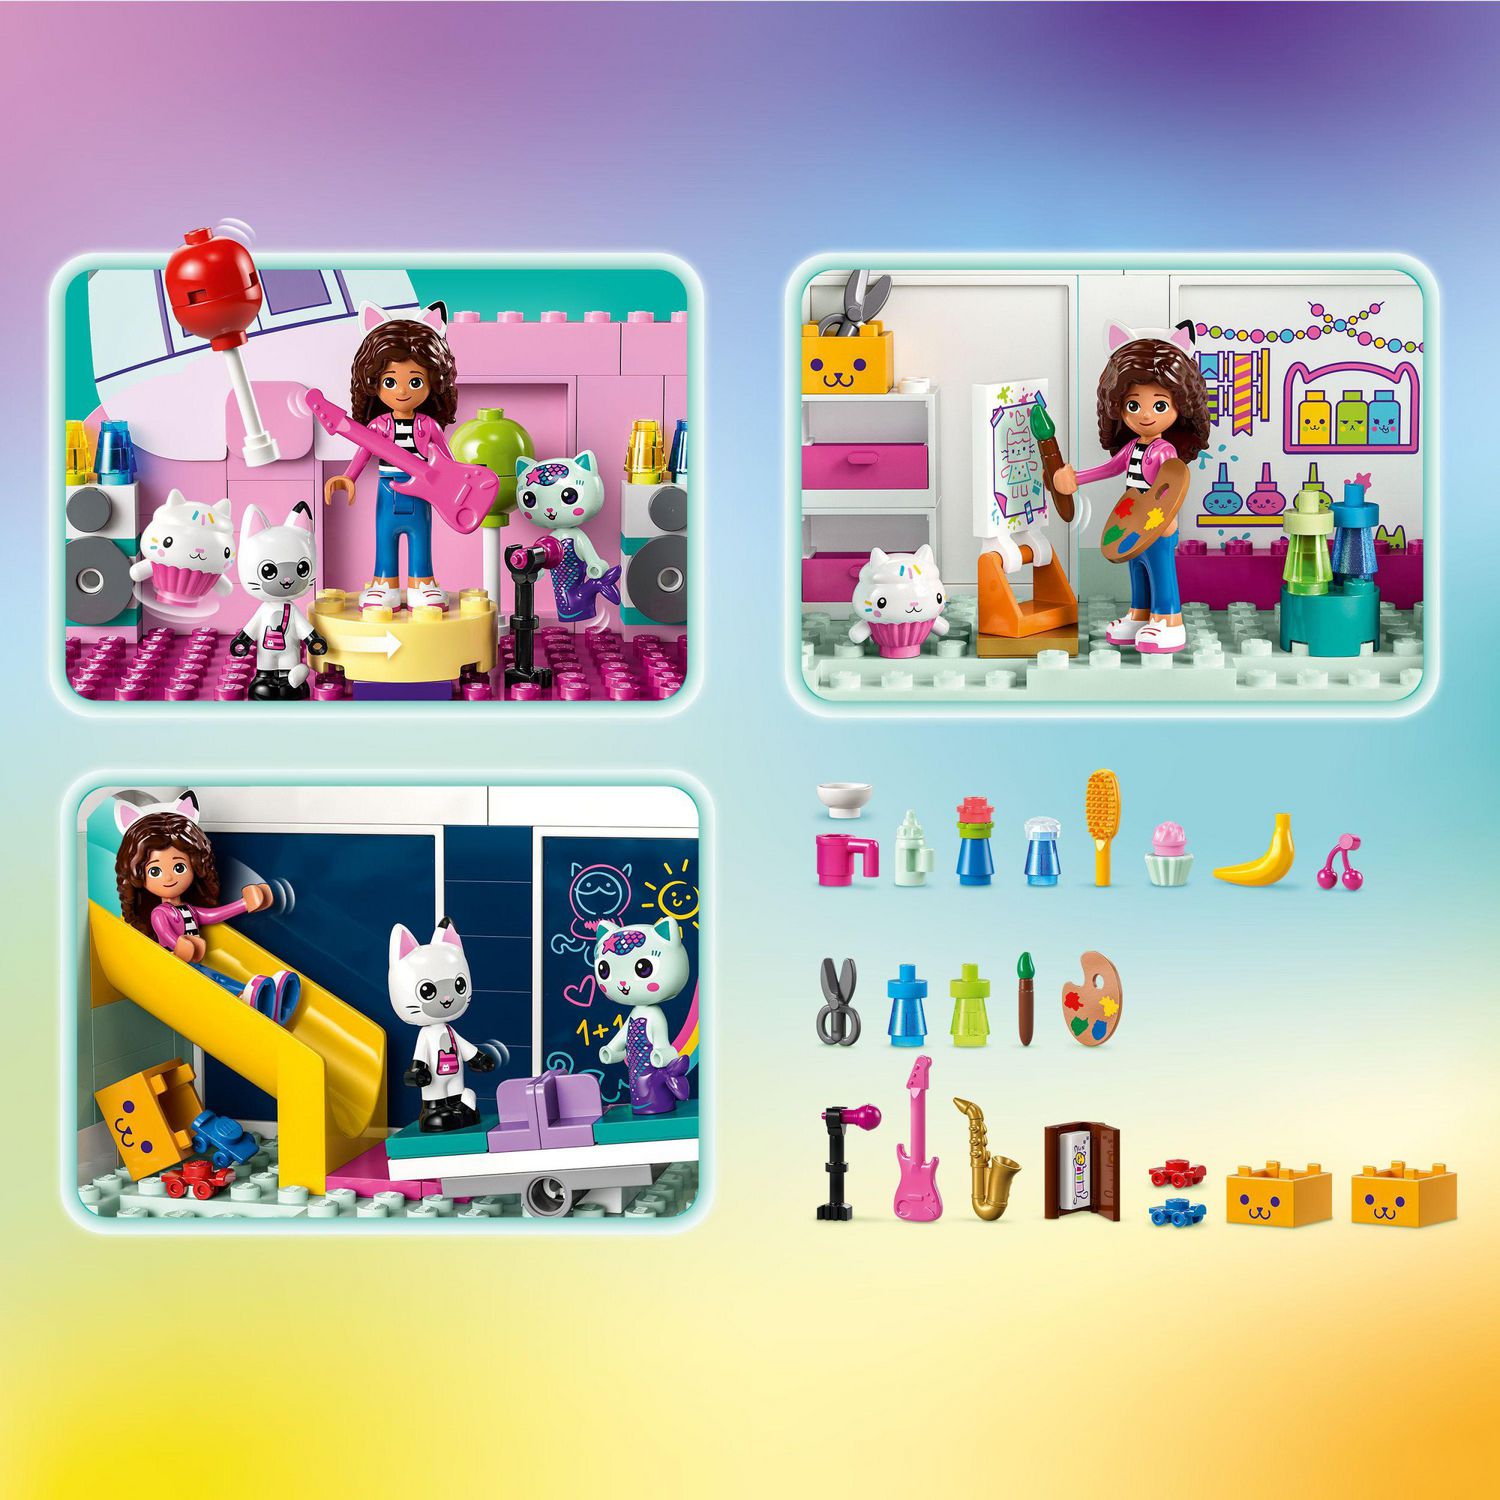 Paws,　Gabby's　Kids　for　Characters　Details　and　Gift　the　and　from　Gabby,　An　Cakey　10788　Authentic　Playhouse　MerCat,　LEGO　Show,　Toy　Building　Pandy　8-Room　4+,　Dollhouse　Popular　with　Ages　Includes　Set,　Including